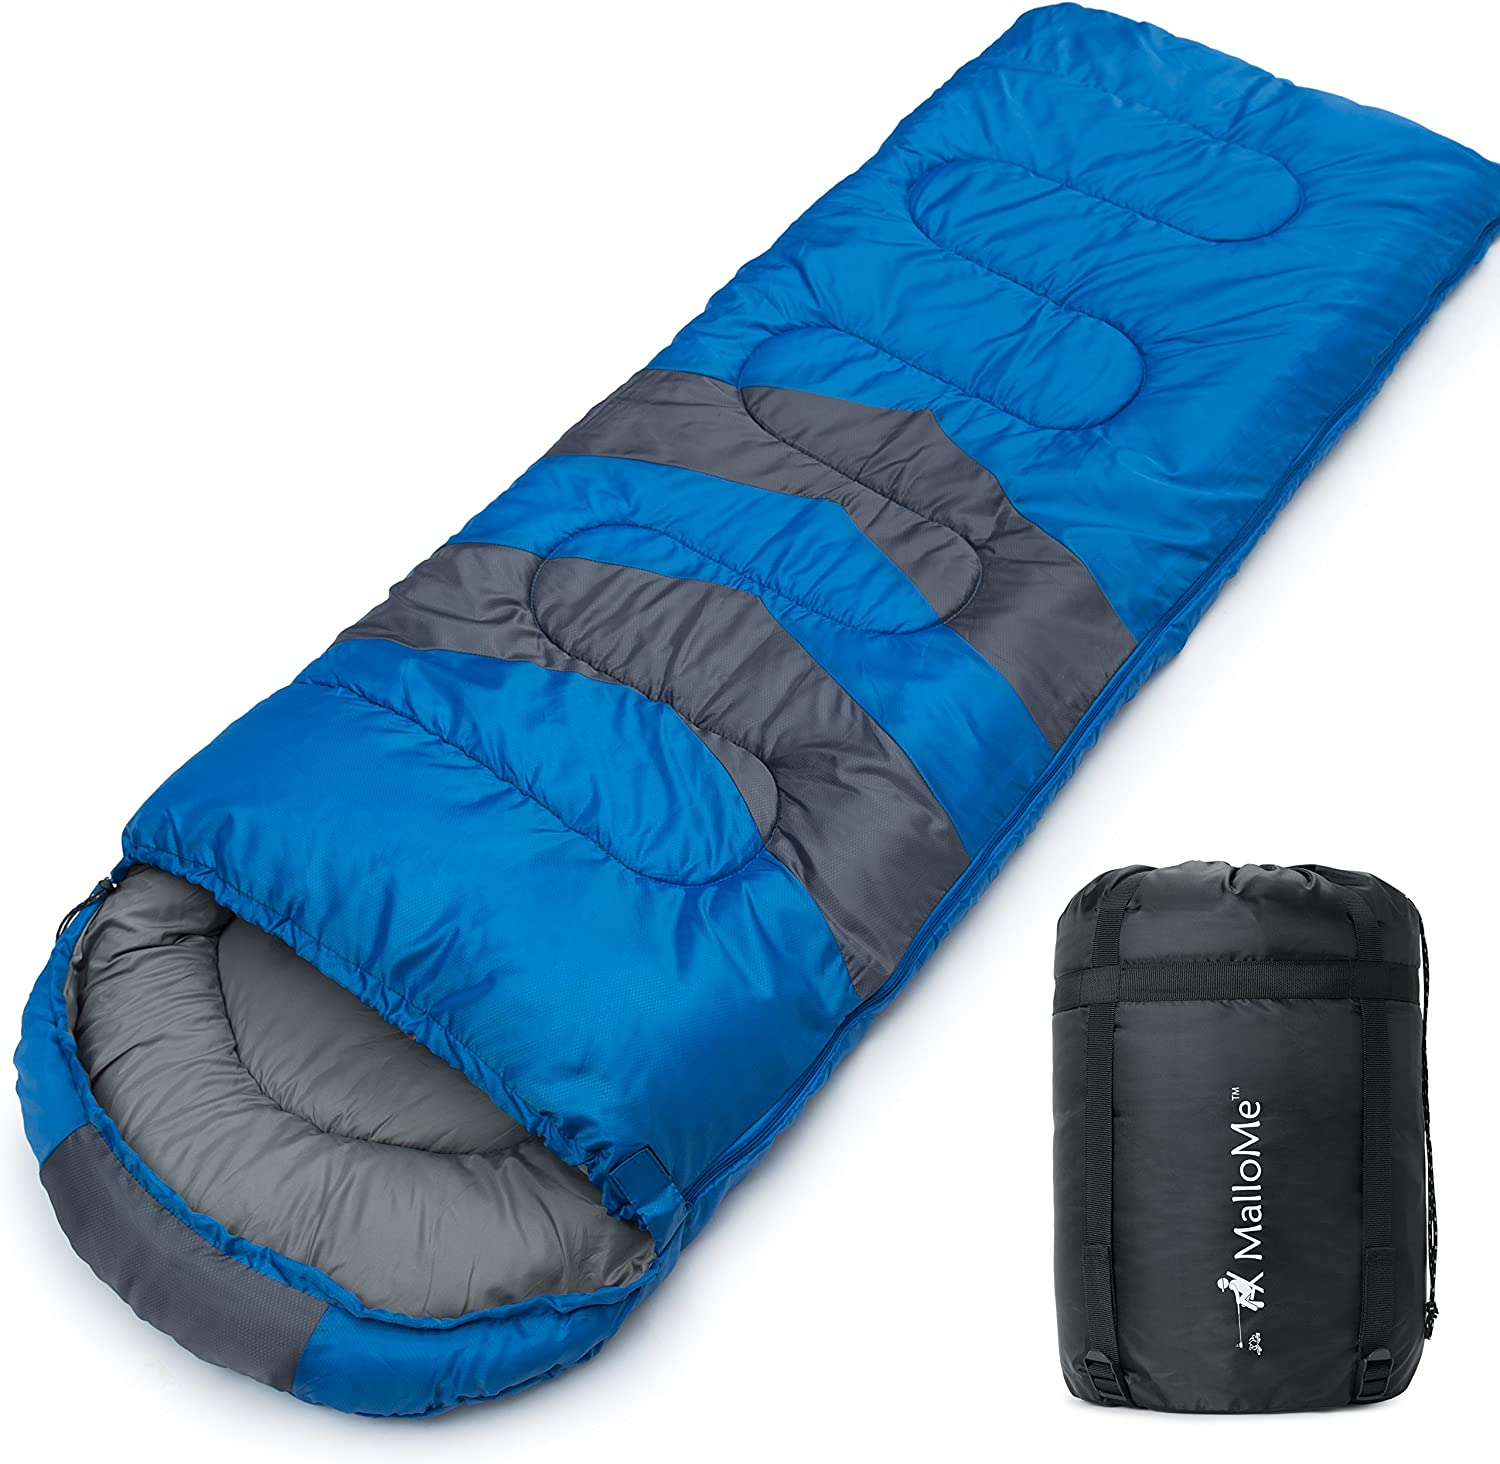 MalloMe Sleeping Bags for Adults Cold Weather & Warm - Backpacking Camping  Sleeping Bag for Kids 10-12, Girls, Boys - Lightweight Compact Camping Gear